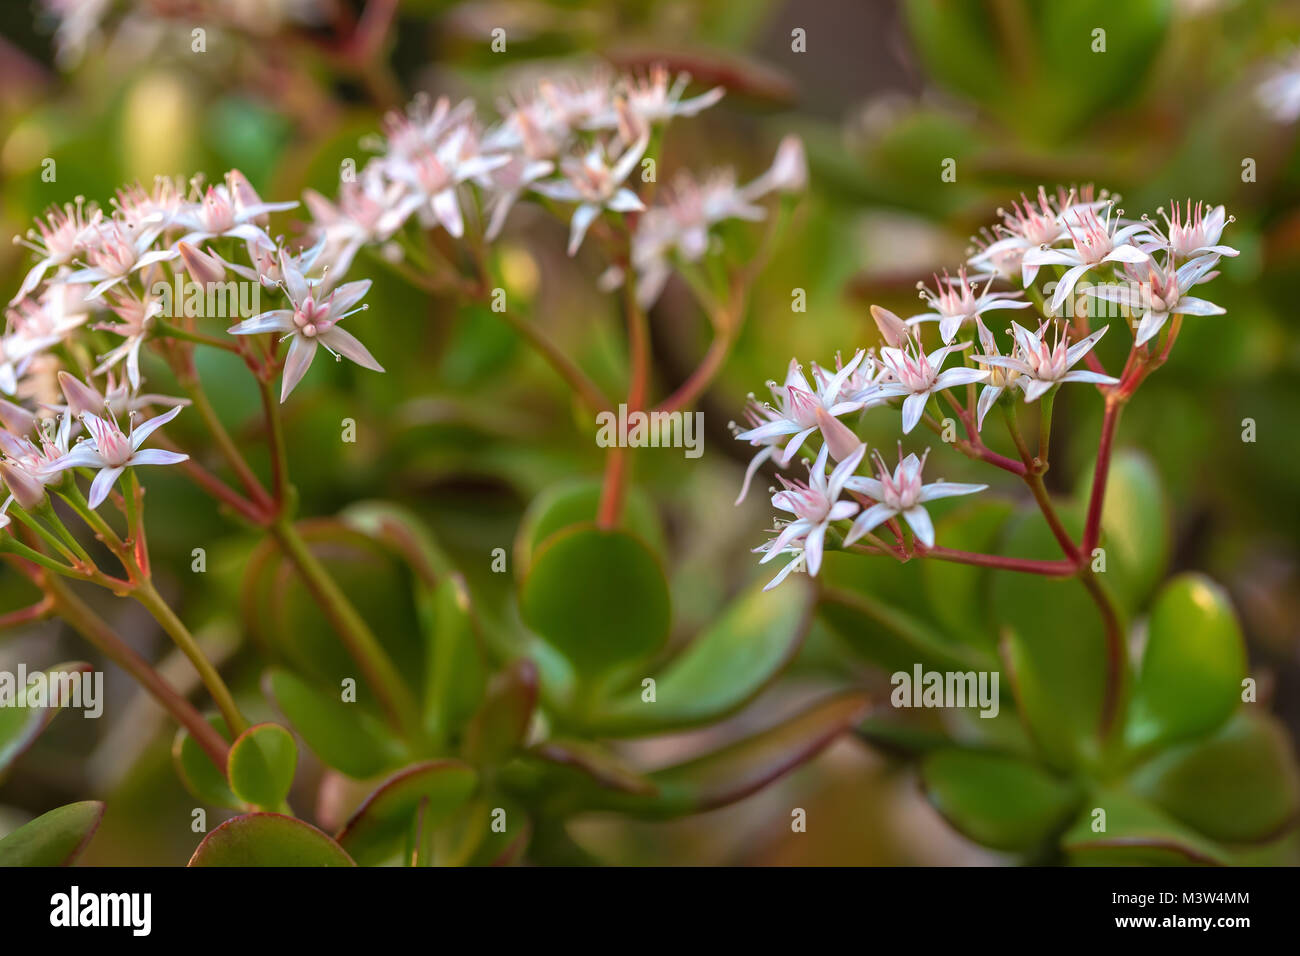 Flowers of the jade plant (Crassula ovata) bloom in late winter. Stock Photo